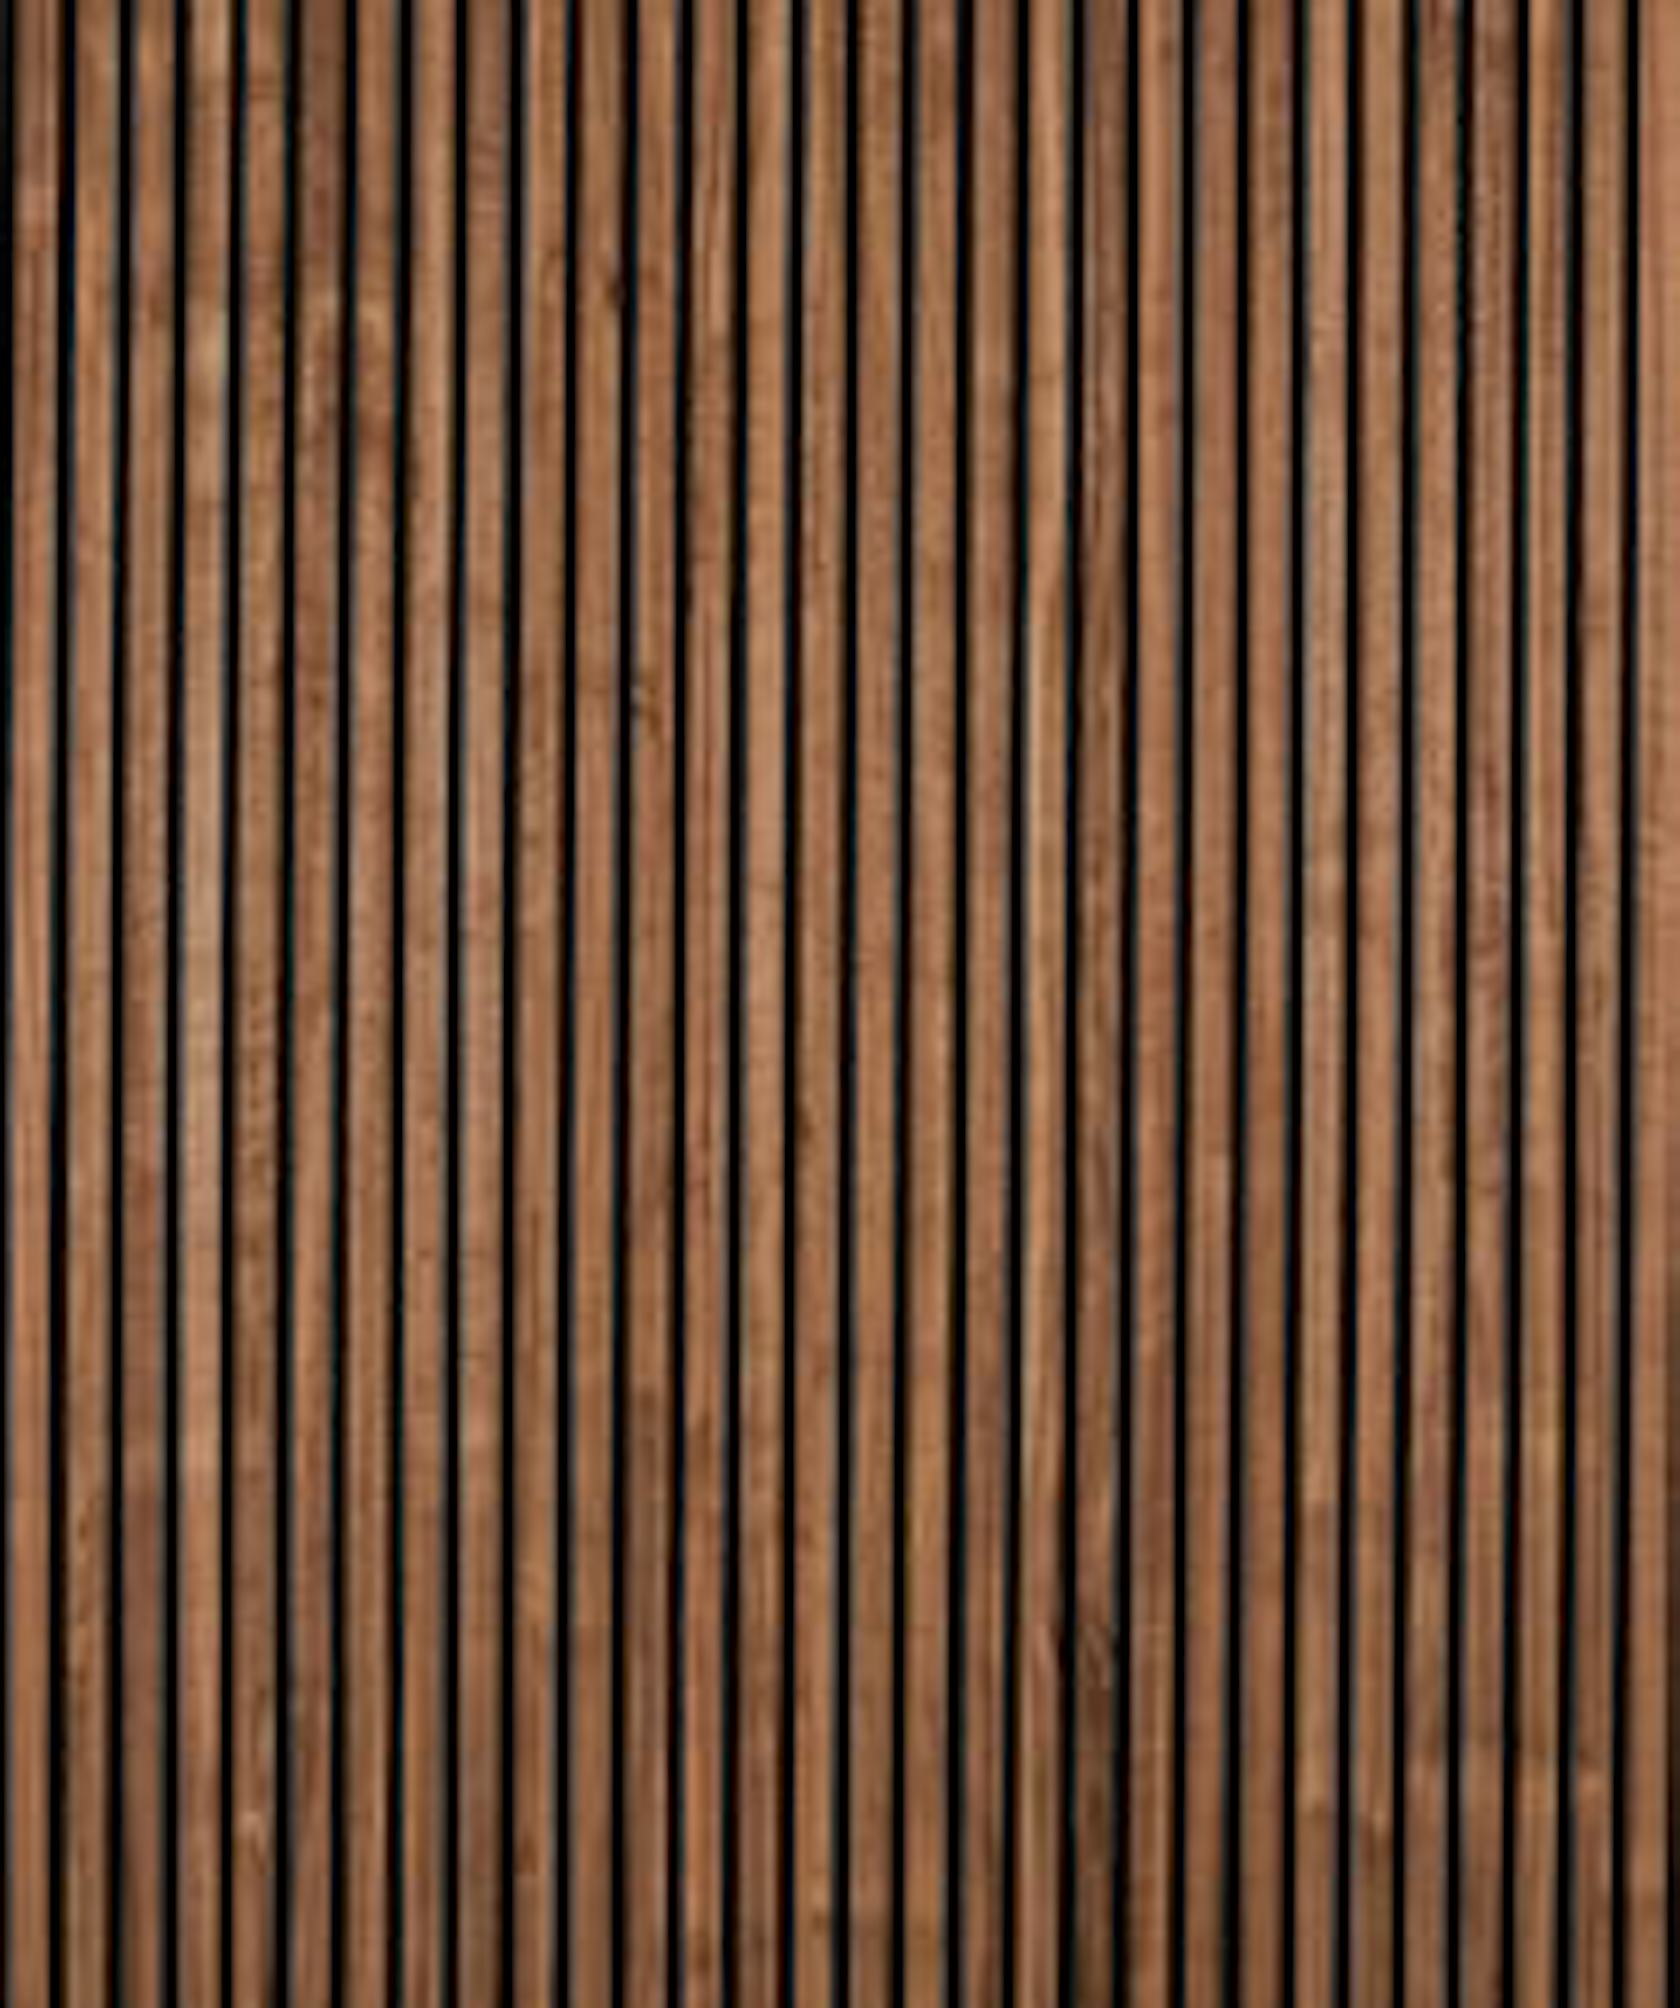 distink-noyer wood indoors interior design hardwood texture gate plywood stained wood